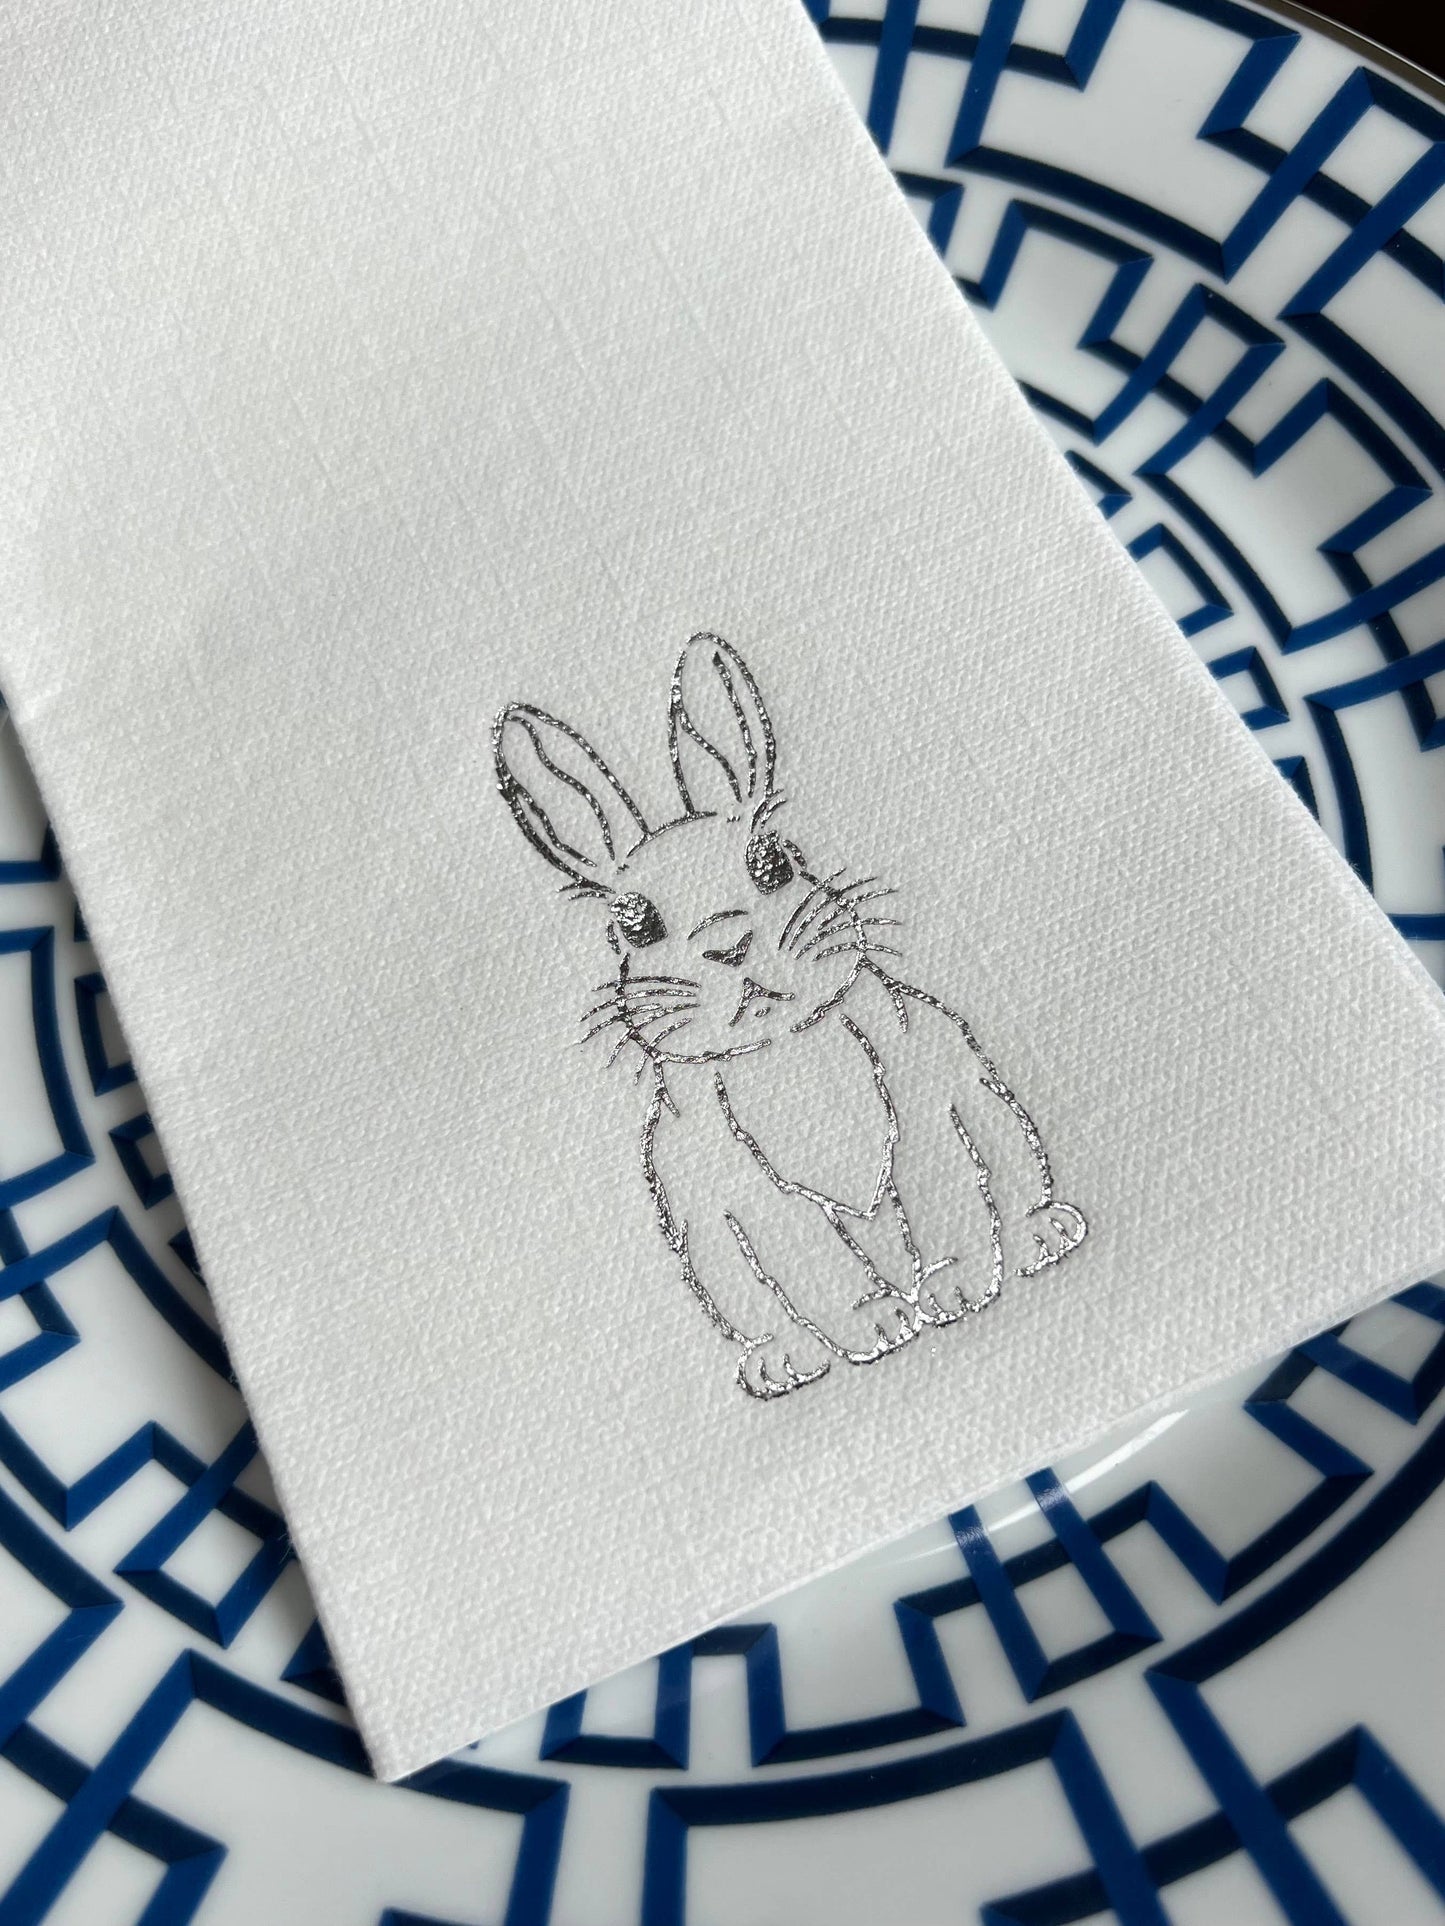 HapBee Paperie - Bunny Linun Guest Towels/Napkins - Silver